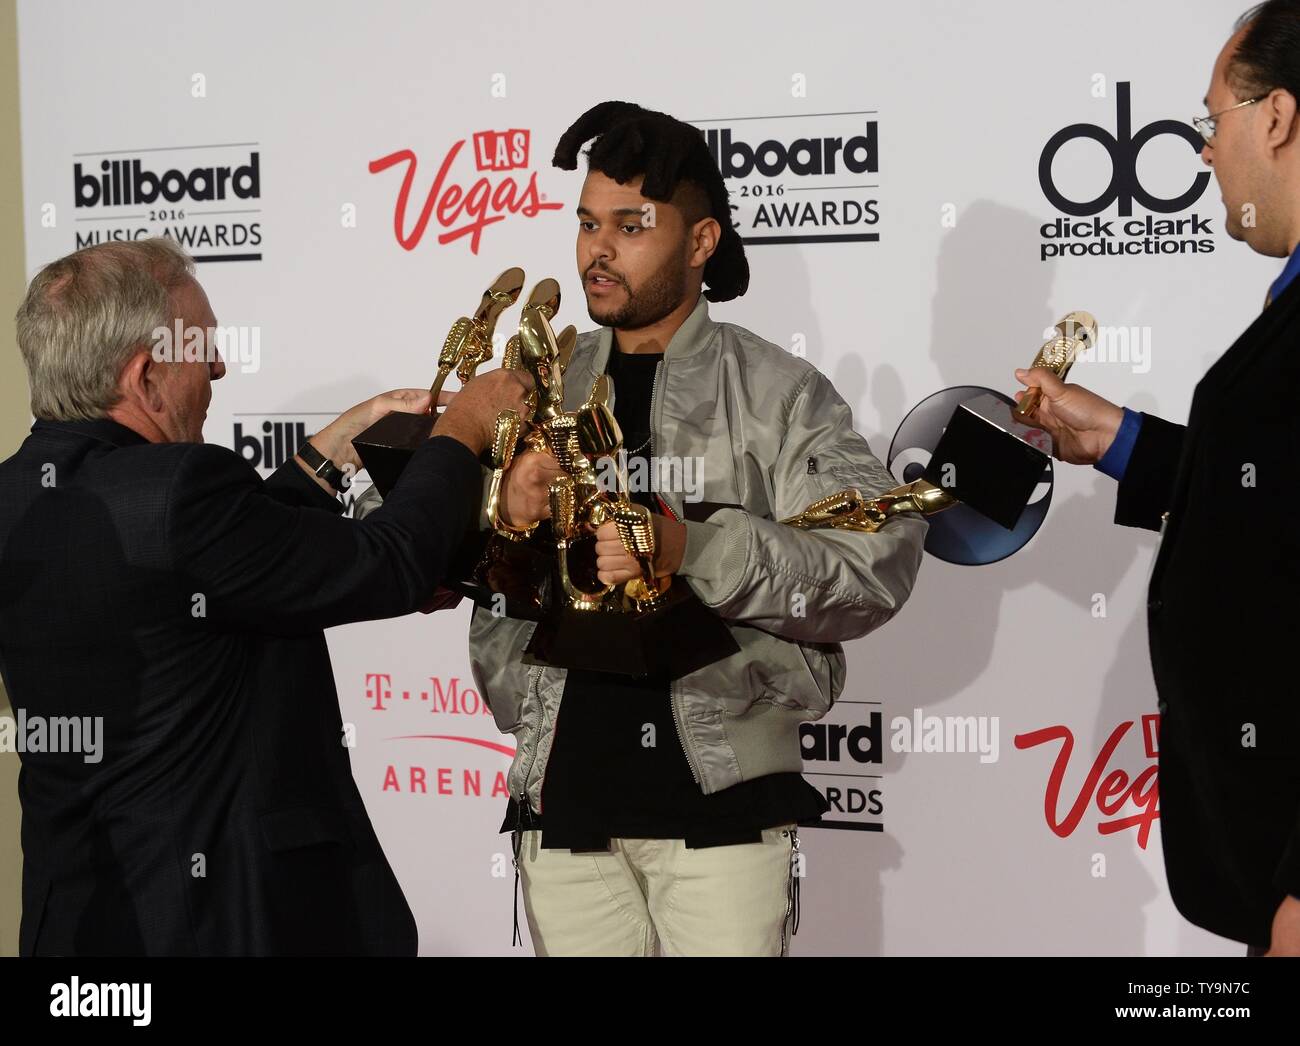 Singer The Weeknd appears backstage with his 8 Awards for Top Hot 100 Artist,  Top Song Sales Artist, Top Radio Songs Artist, Top Streaming Songs Artist,  Top R&B Artist, Top R&B Album,